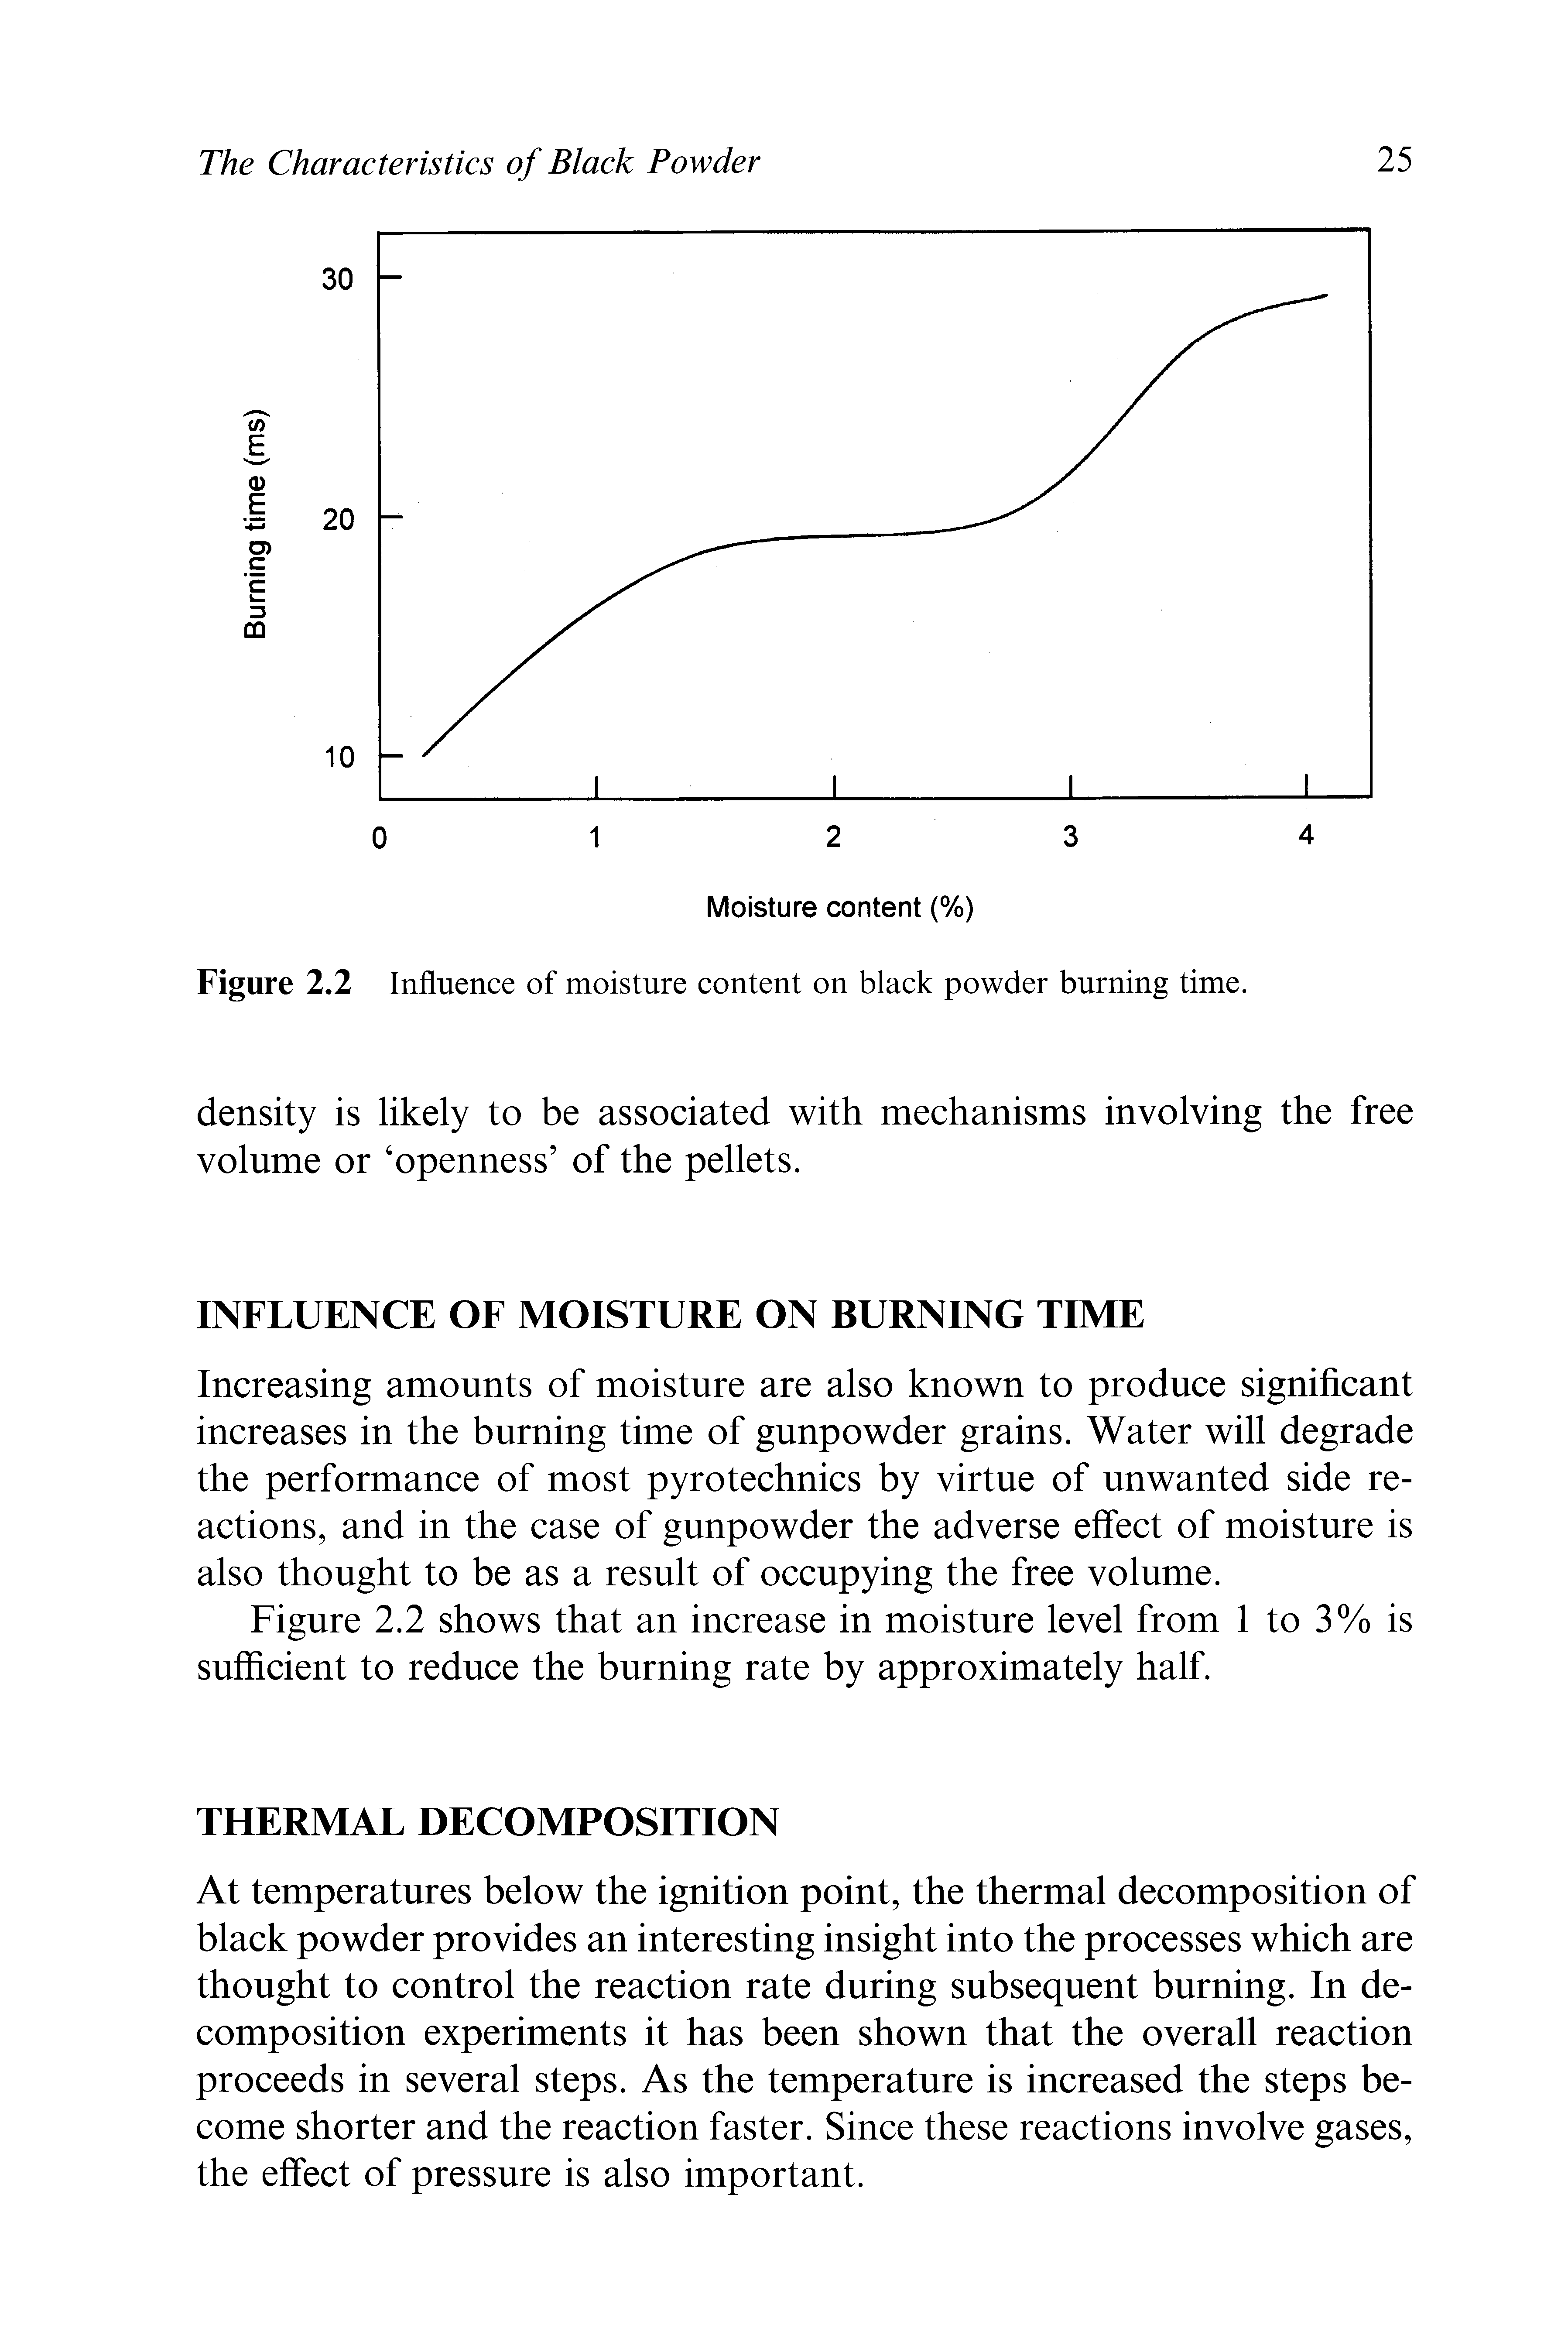 Figure 2.2 Influence of moisture content on black powder burning time.